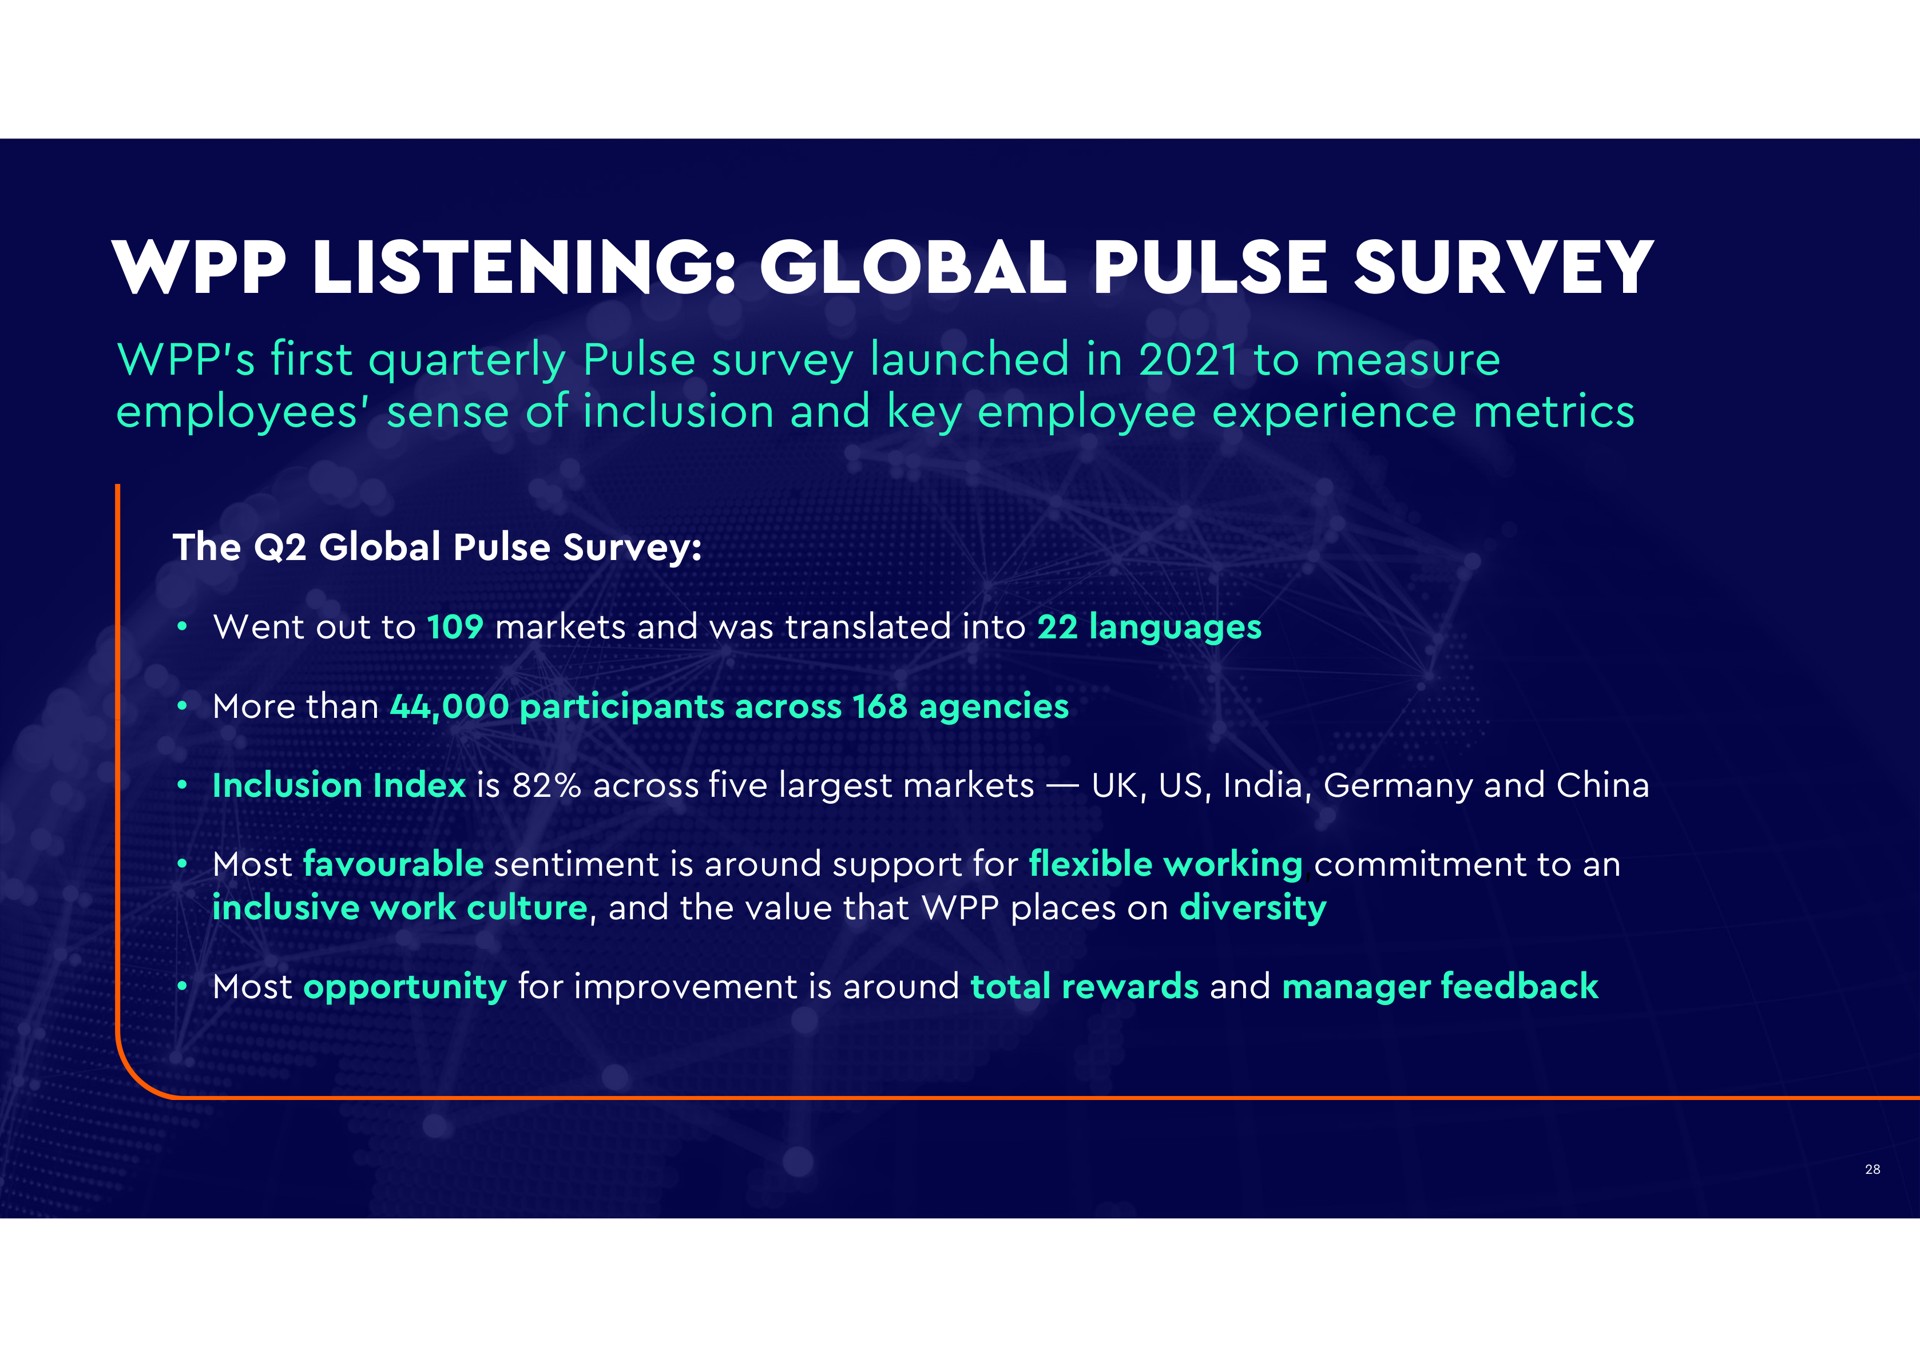 listening global pulse survey first quarterly launched in to measure employees sense of inclusion and key employee experience metrics the went out to markets and was translated into languages more than participants across agencies inclusion index is across five markets us and china most sentiment is around support for flexible working commitment to an inclusive work culture and the value that places on diversity most opportunity for improvement is around total rewards and manager feedback | WPP